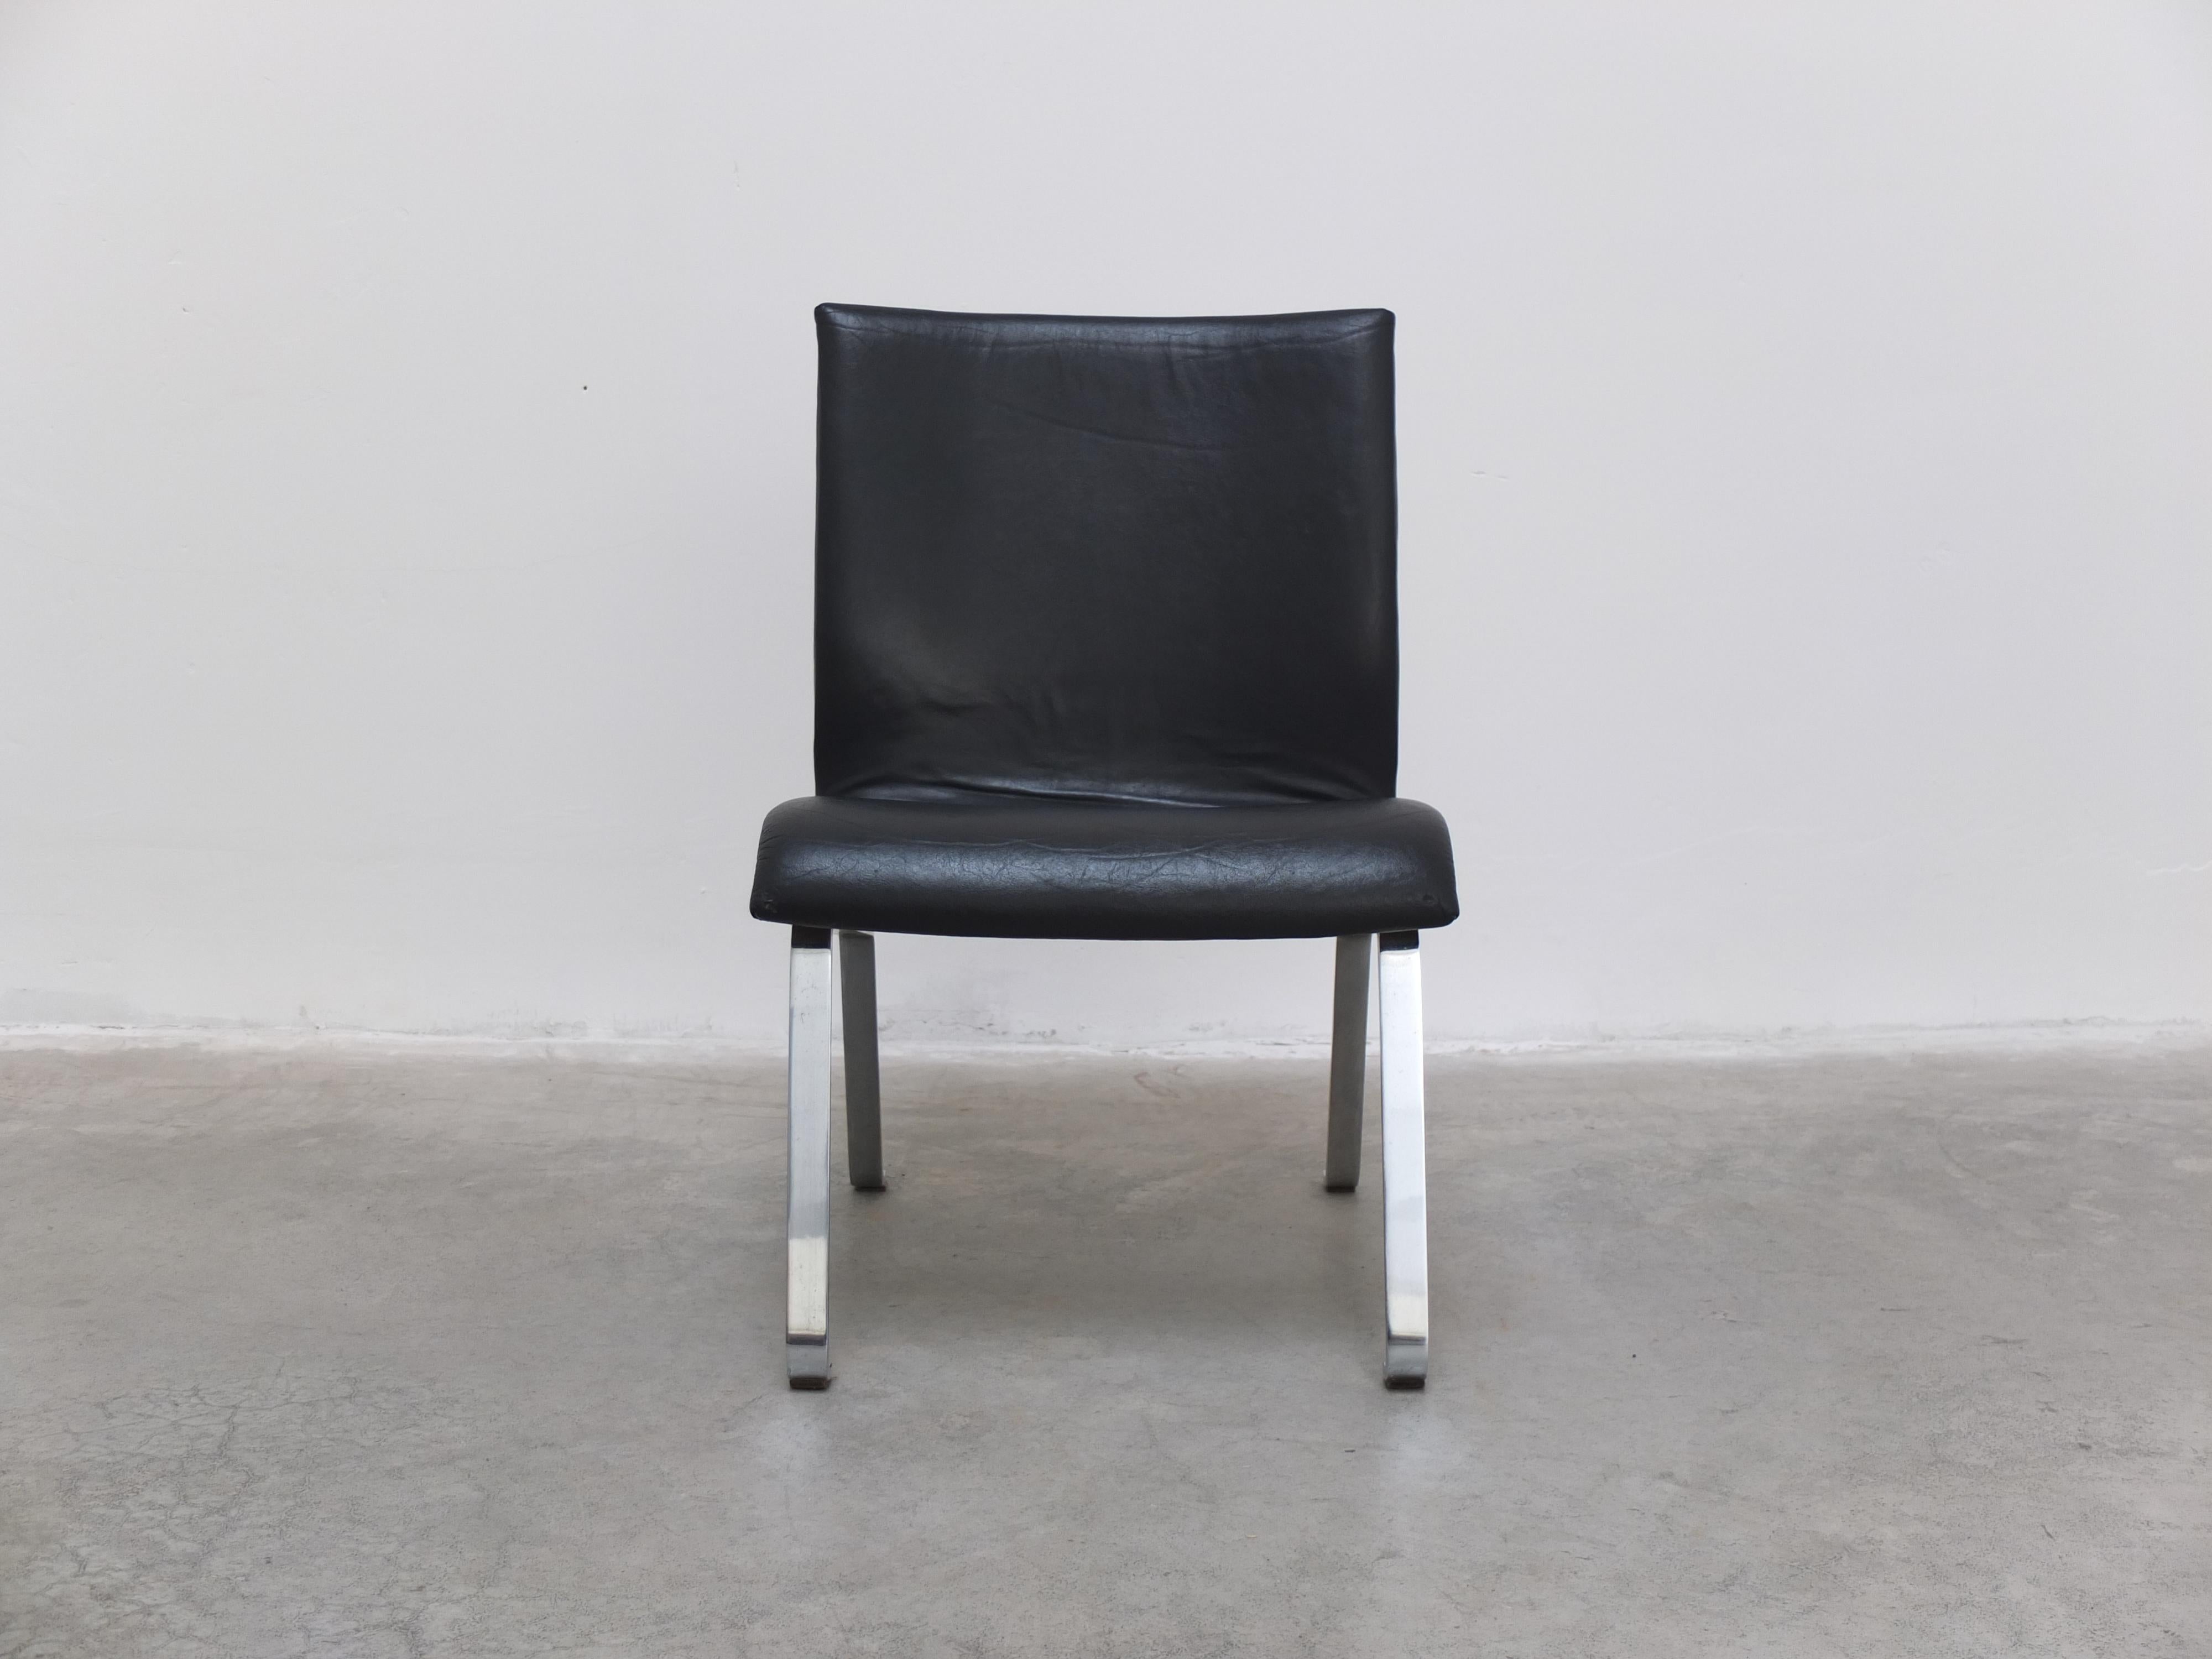 Unique Black Leather & Steel Modernist Lounge Chair, 1960s For Sale 2